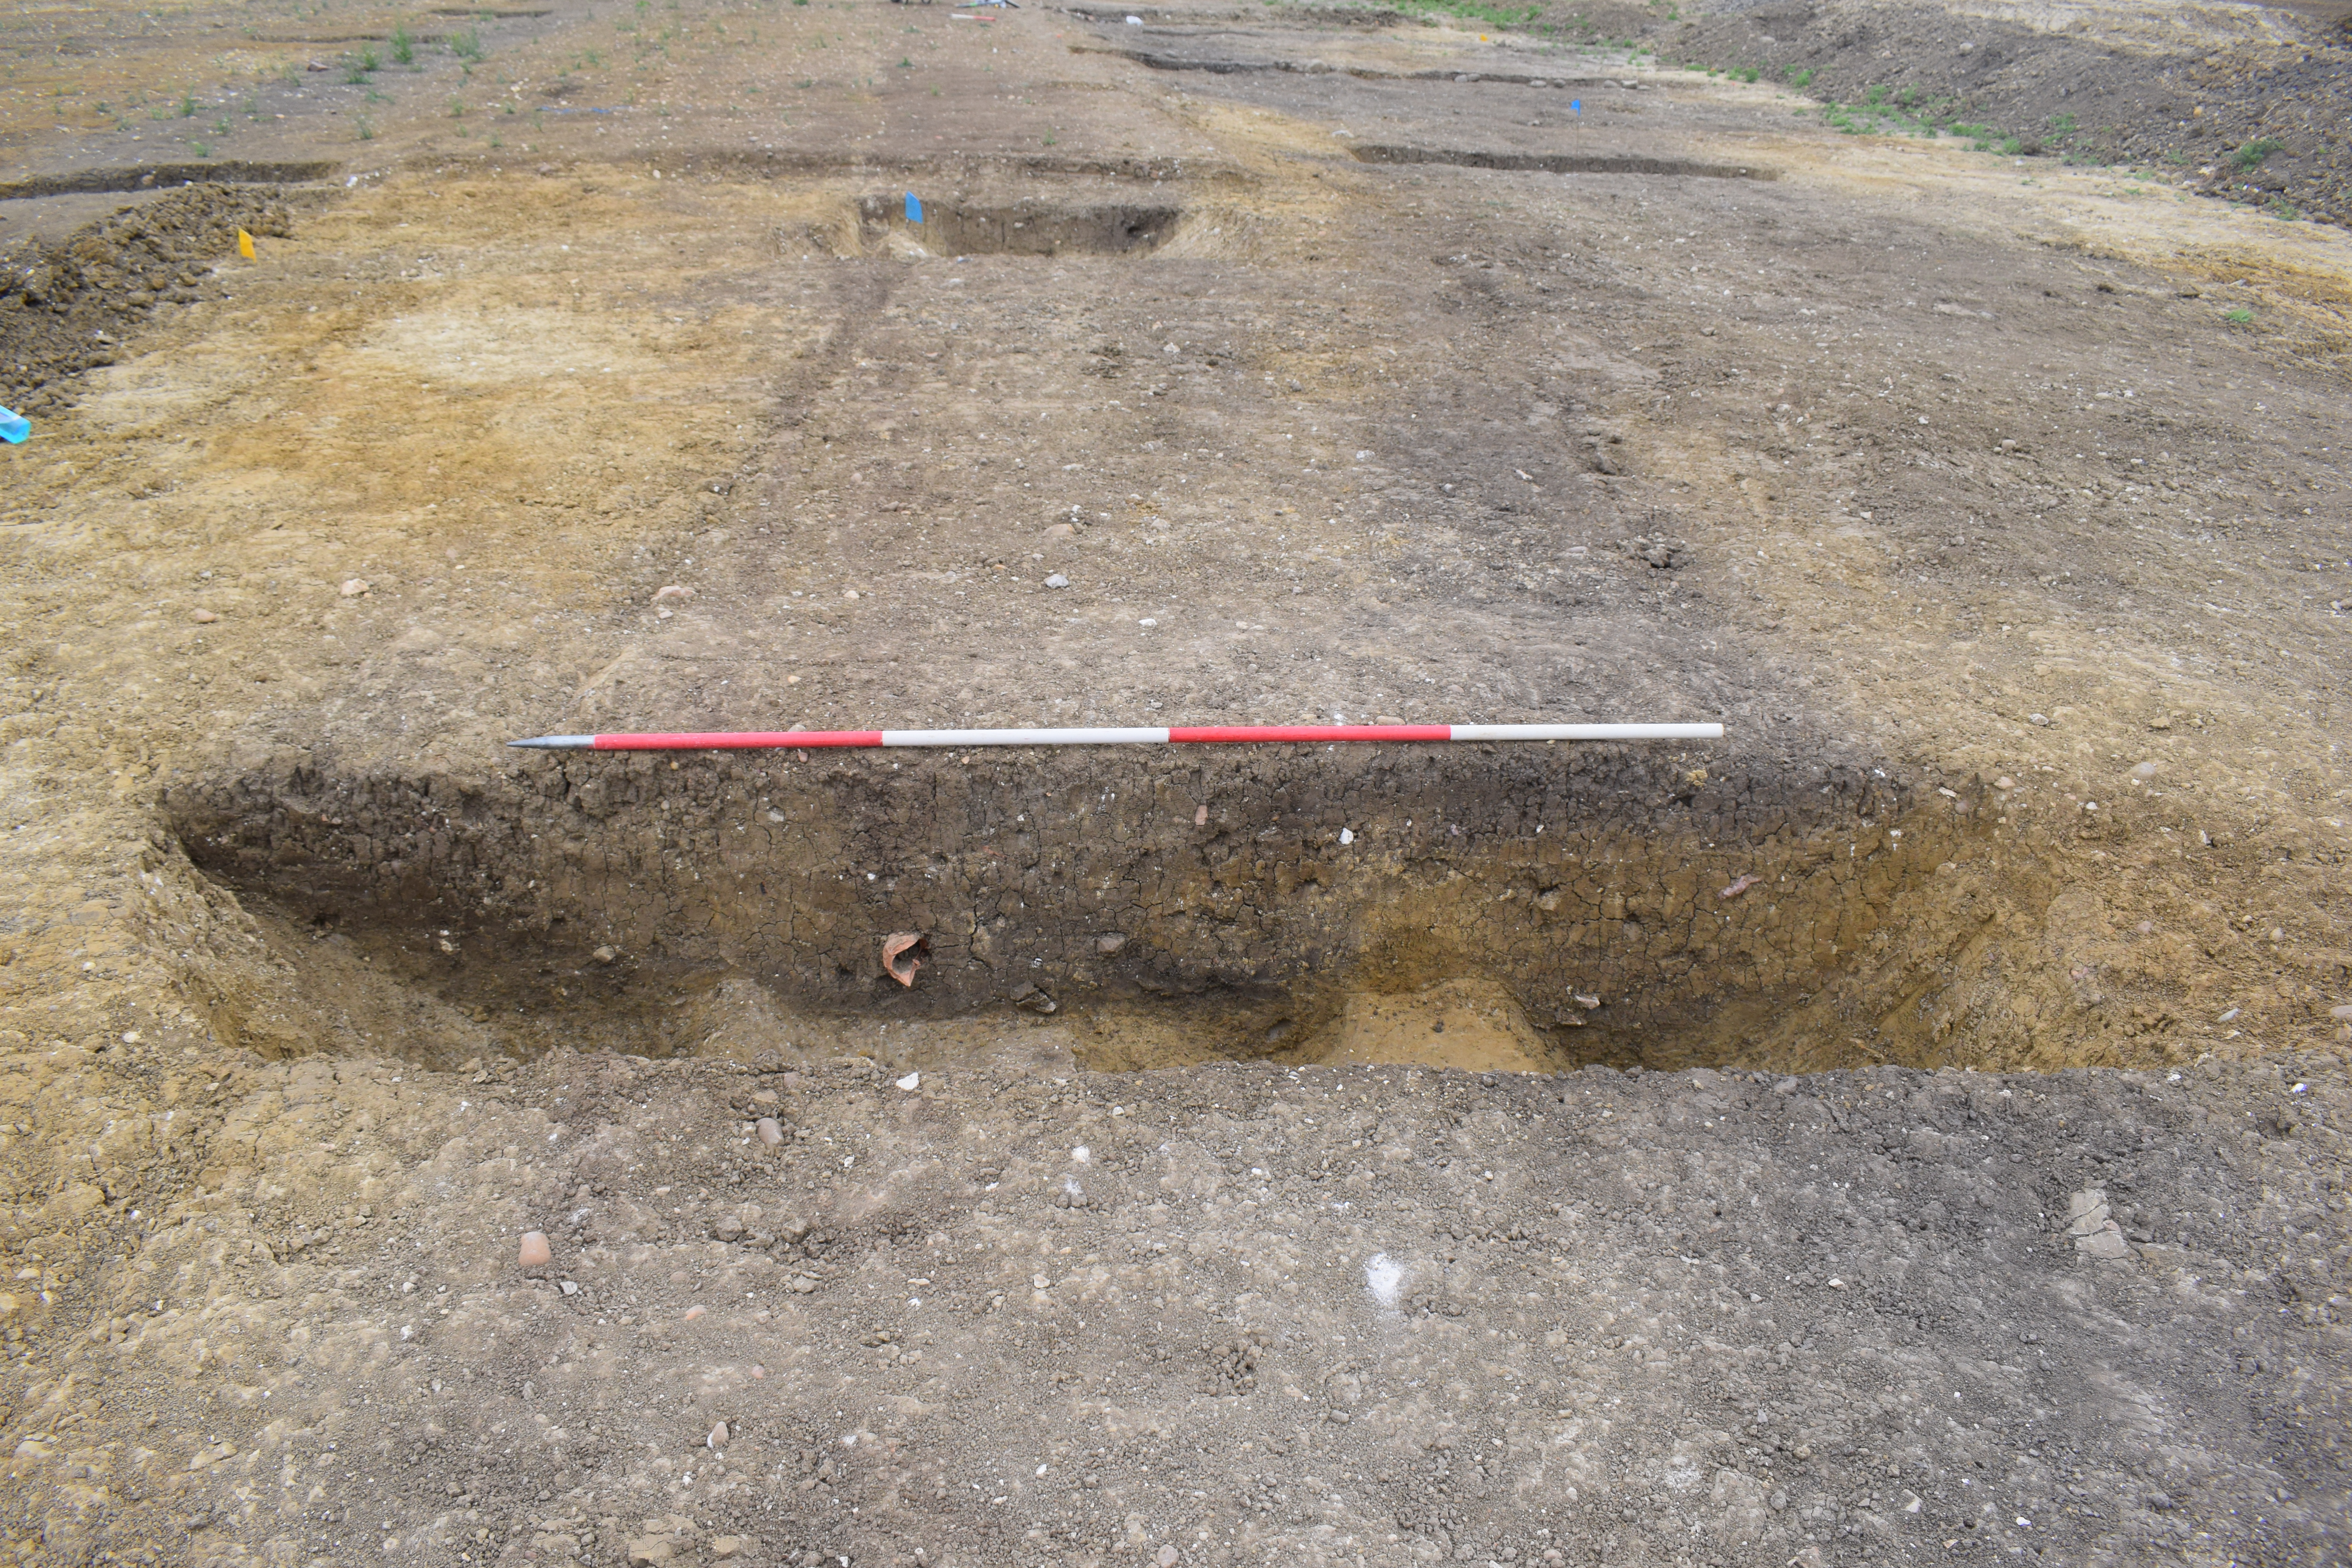 In a field stripped of top soil, a one meter wide slot excavated through a dark area of archaeological fill reveals ditches running next to each other..